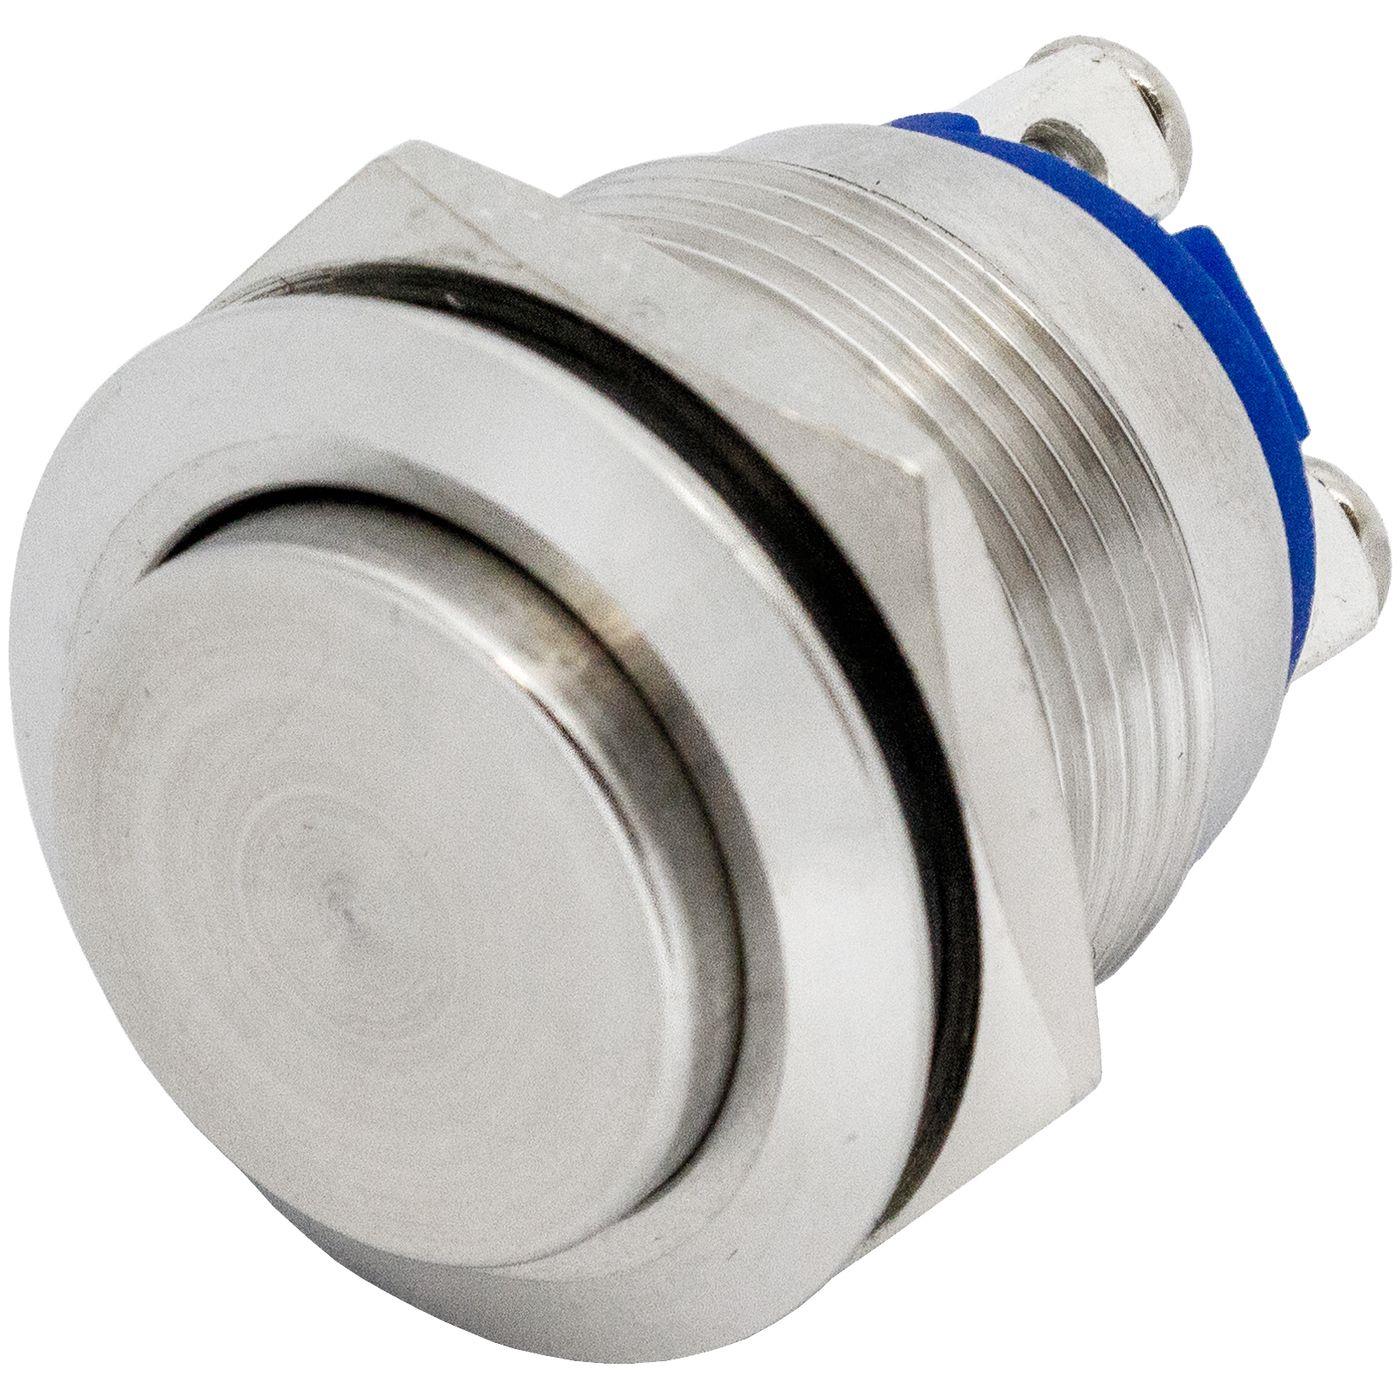 Stainless steel Push button raised Ø19mm IP65 Screw Connection 250V 3A Vandal-proof